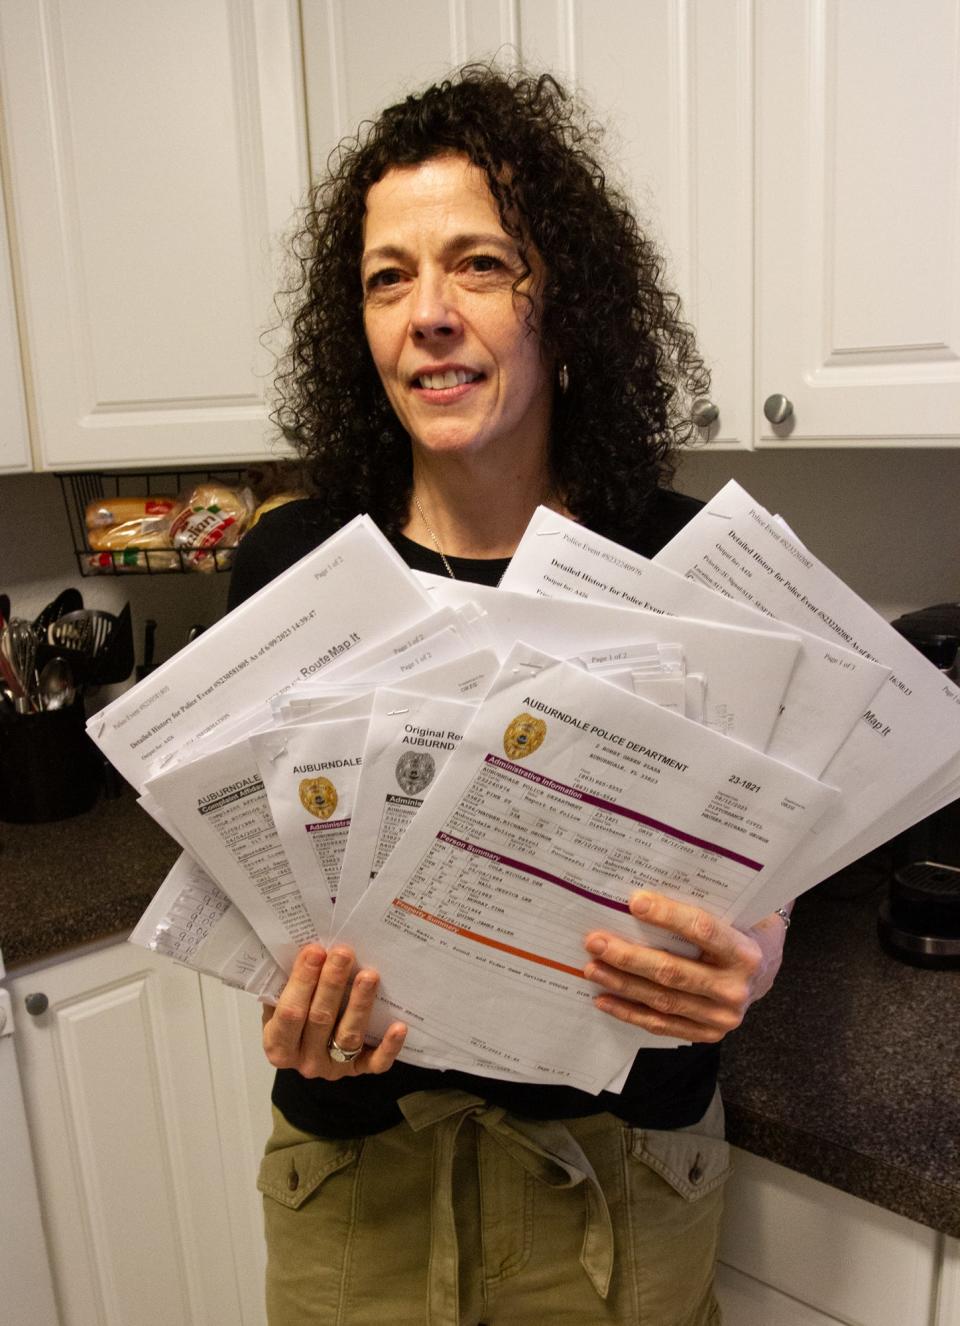 Tina Murray of Auburndale holds copies of records from police complaints she and her son have made against their neighbors on Pine Street. Murray lives with her adult son, John Murray, and they say their neighbors have engaged in a harassment campaign against them since March.